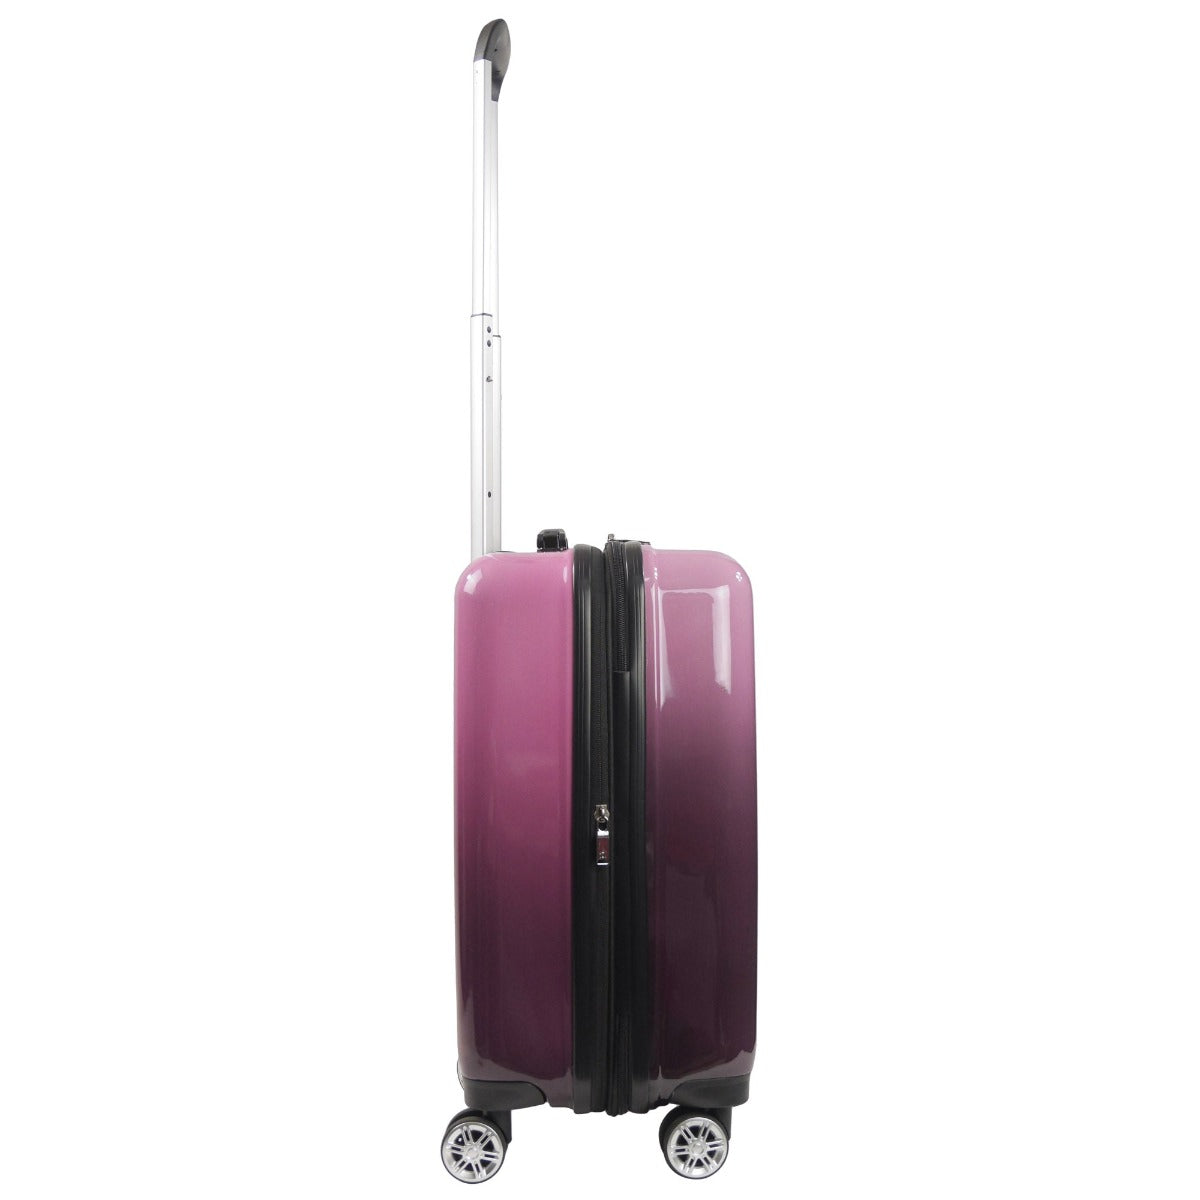 Pink Ful Impulse Ombre 22-inch hard-side carry-on spinner suitcase rolling luggage